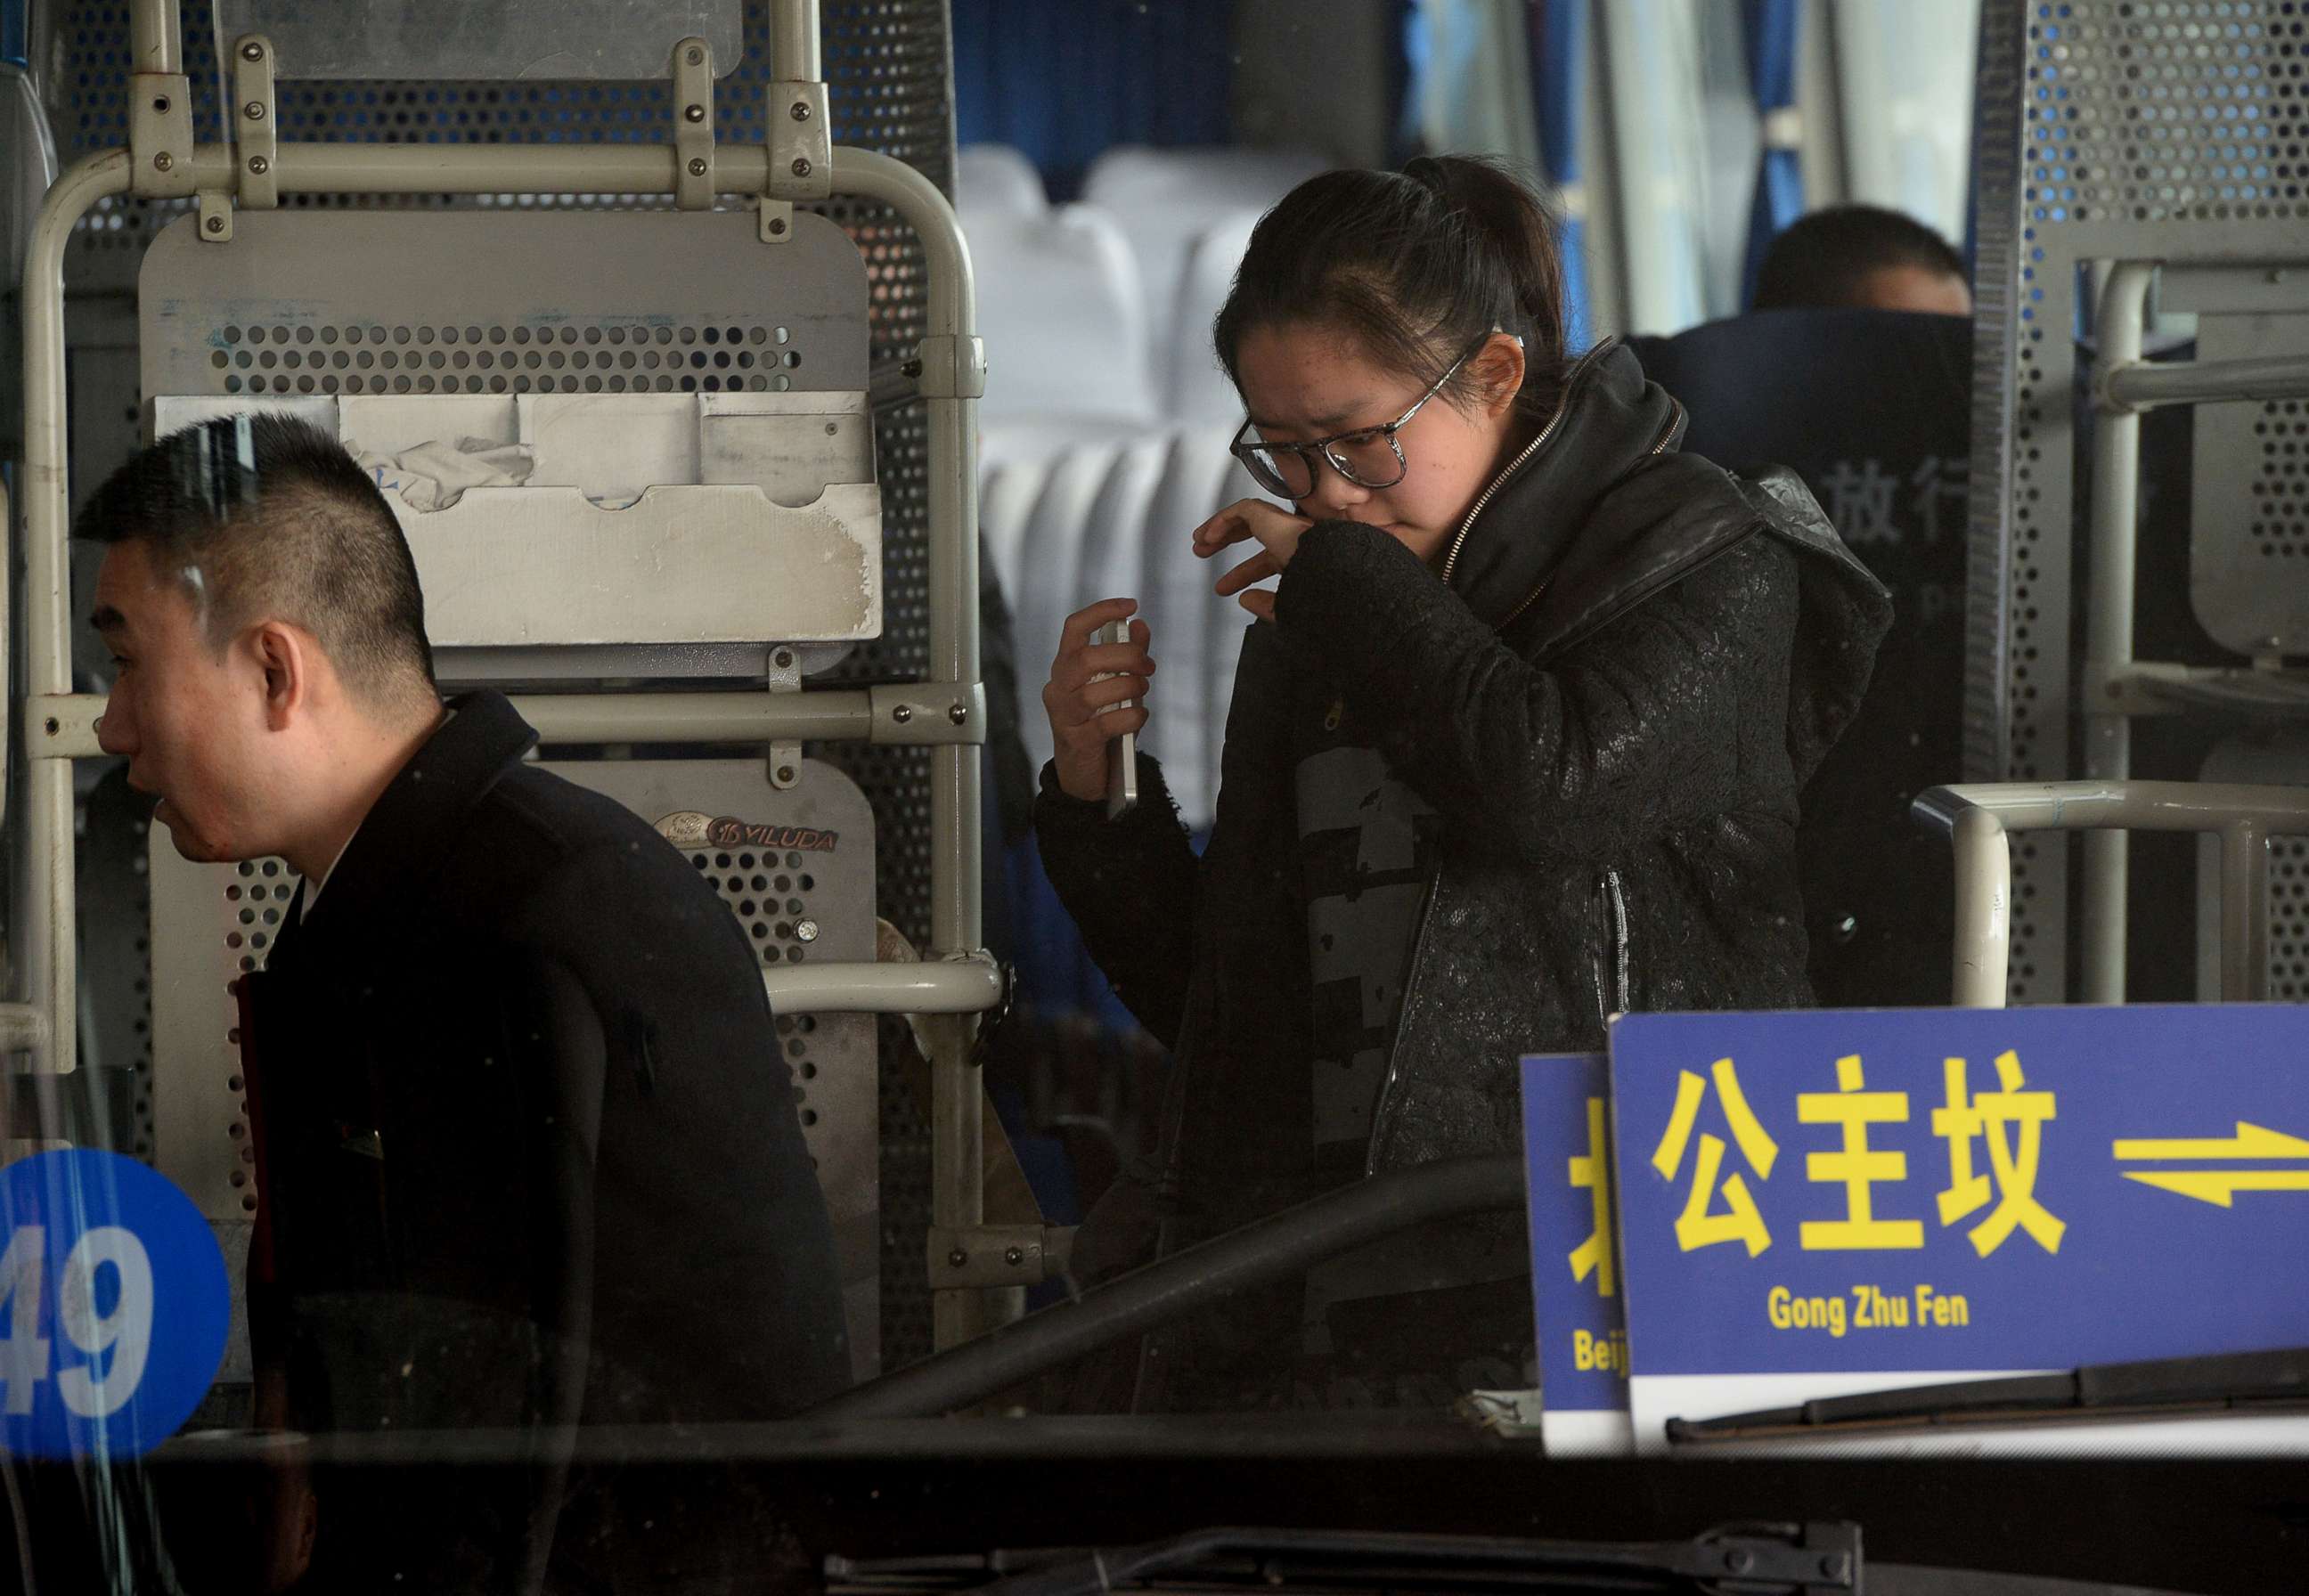 PHOTO: A crying woman is escorted to a bus for relatives of passengers of a missing Malaysia Airlines flight, MH-370, at Beijing International Airport in Beijing on March 8, 2014.